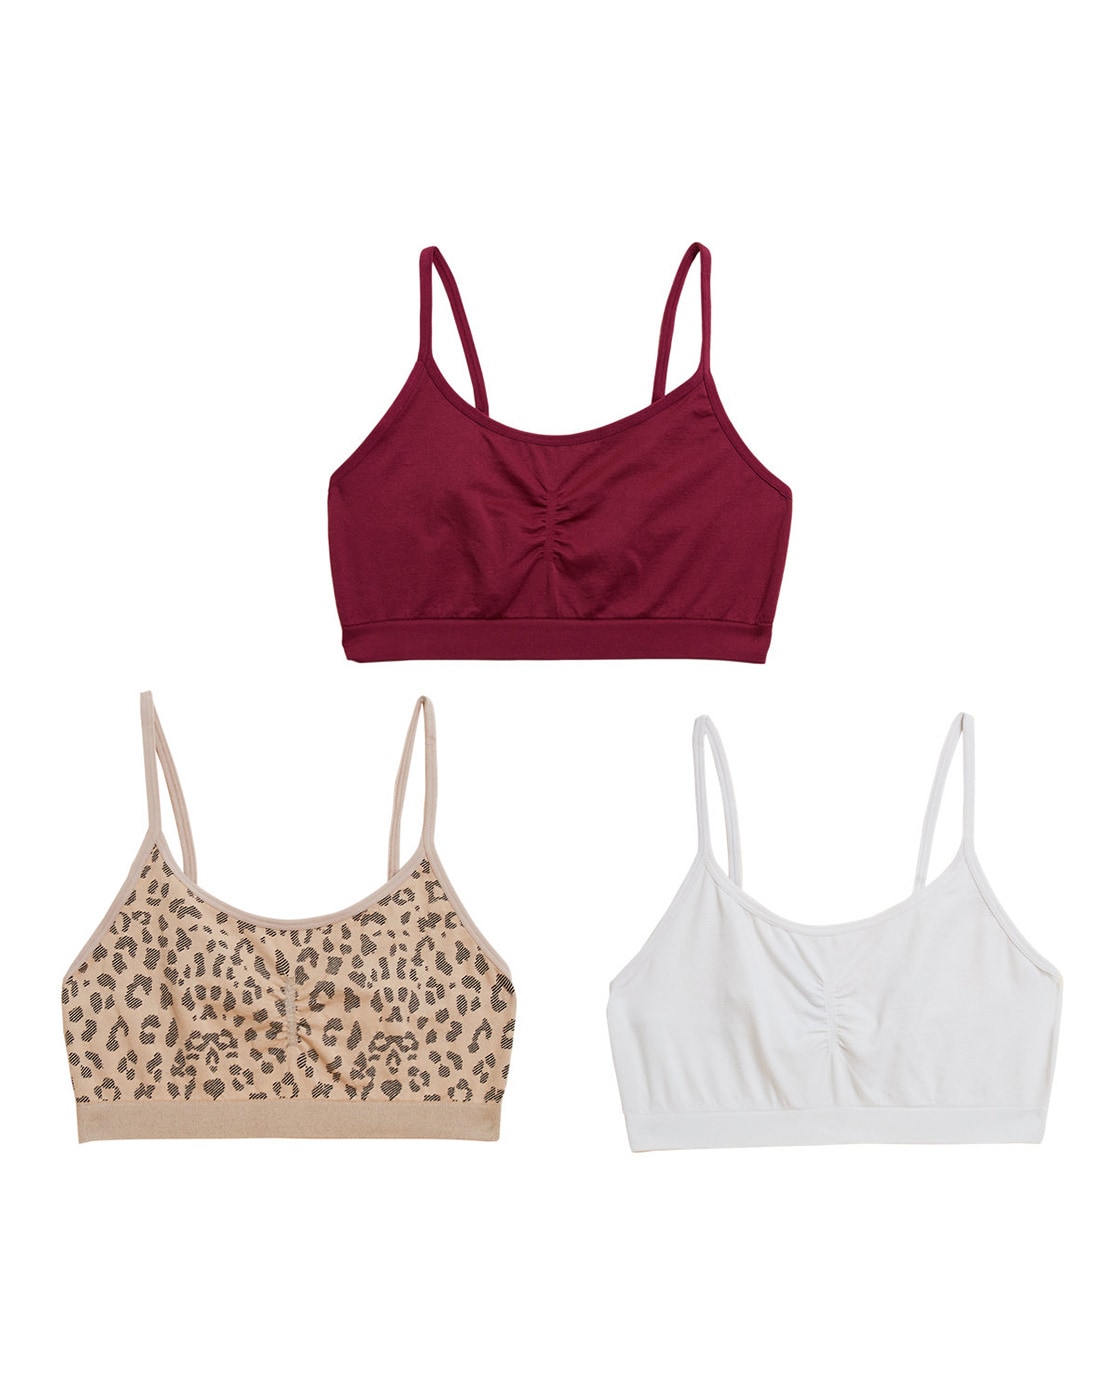 Buy Marks & Spencer Seamless Non Wired Crop Tops - Multi-color (Pack of 3)  online